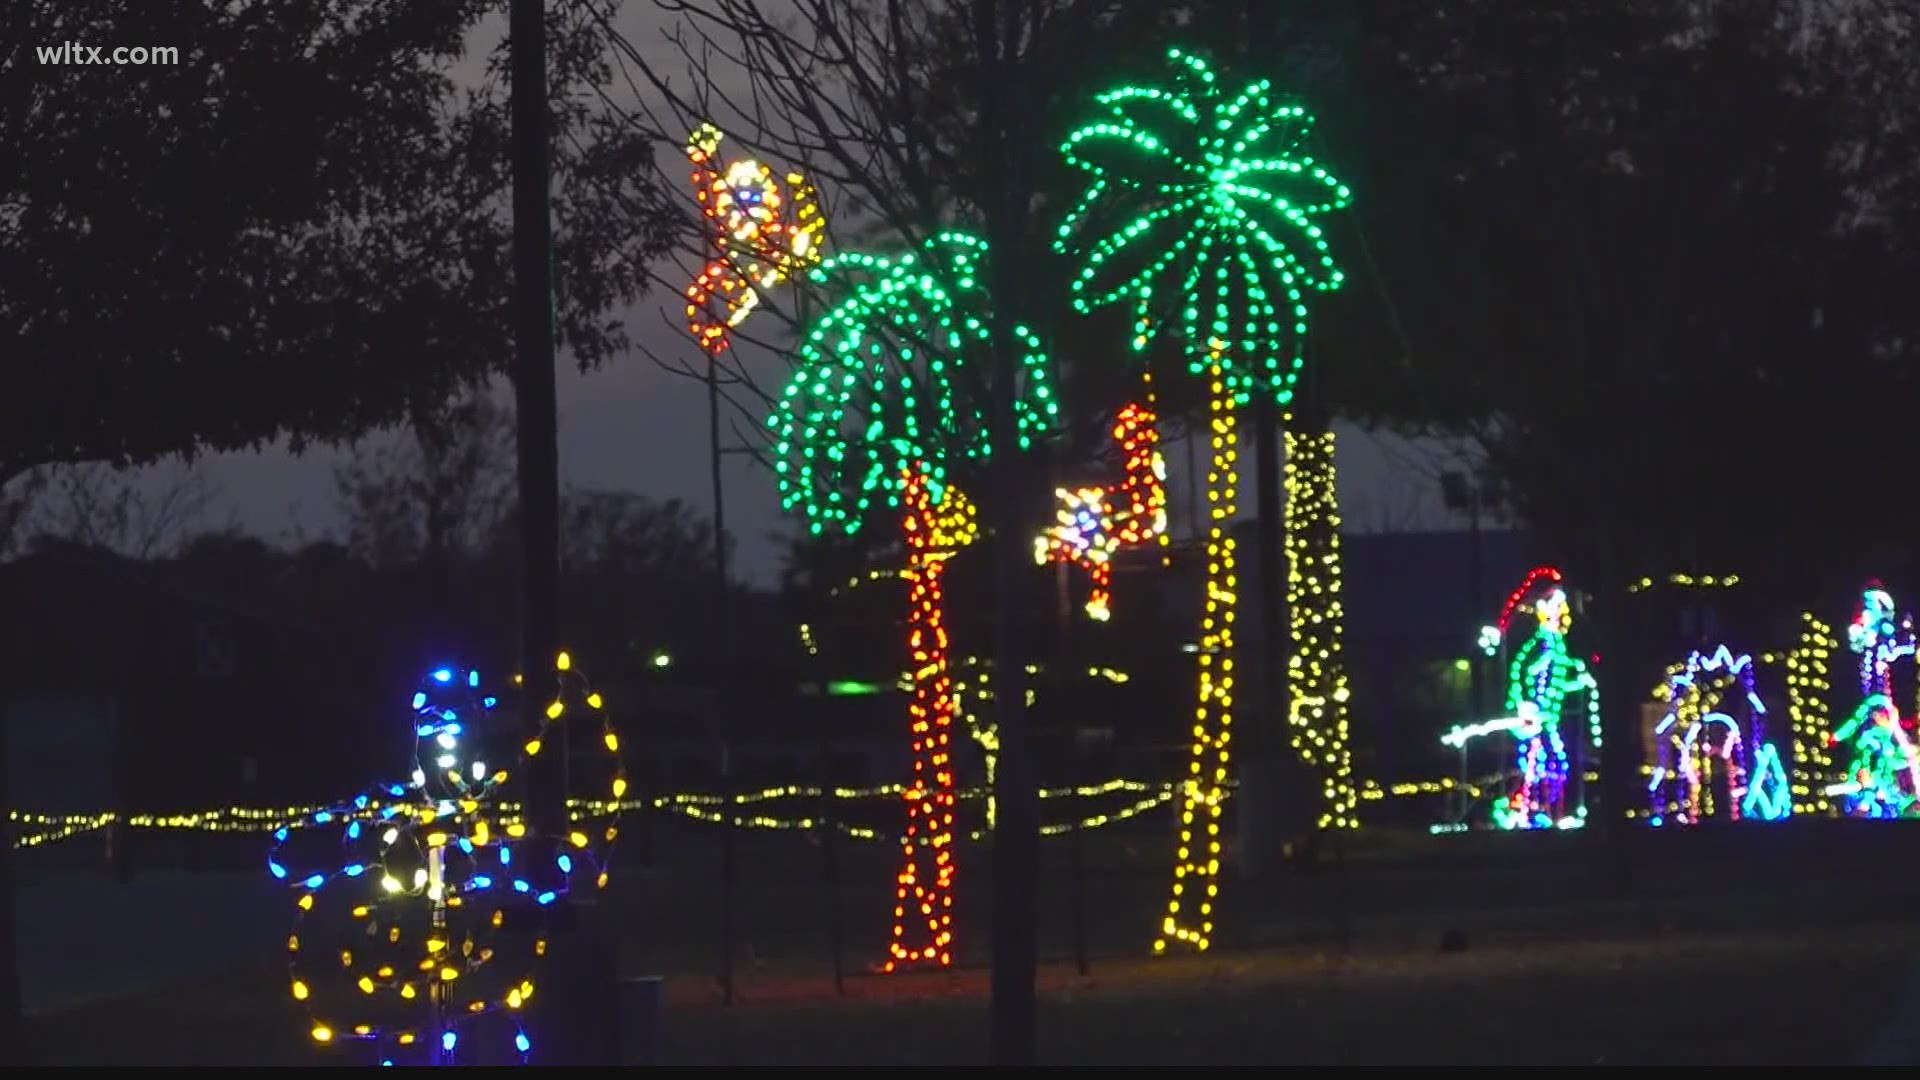 Where to find drive through holiday lights near Columbia, SC